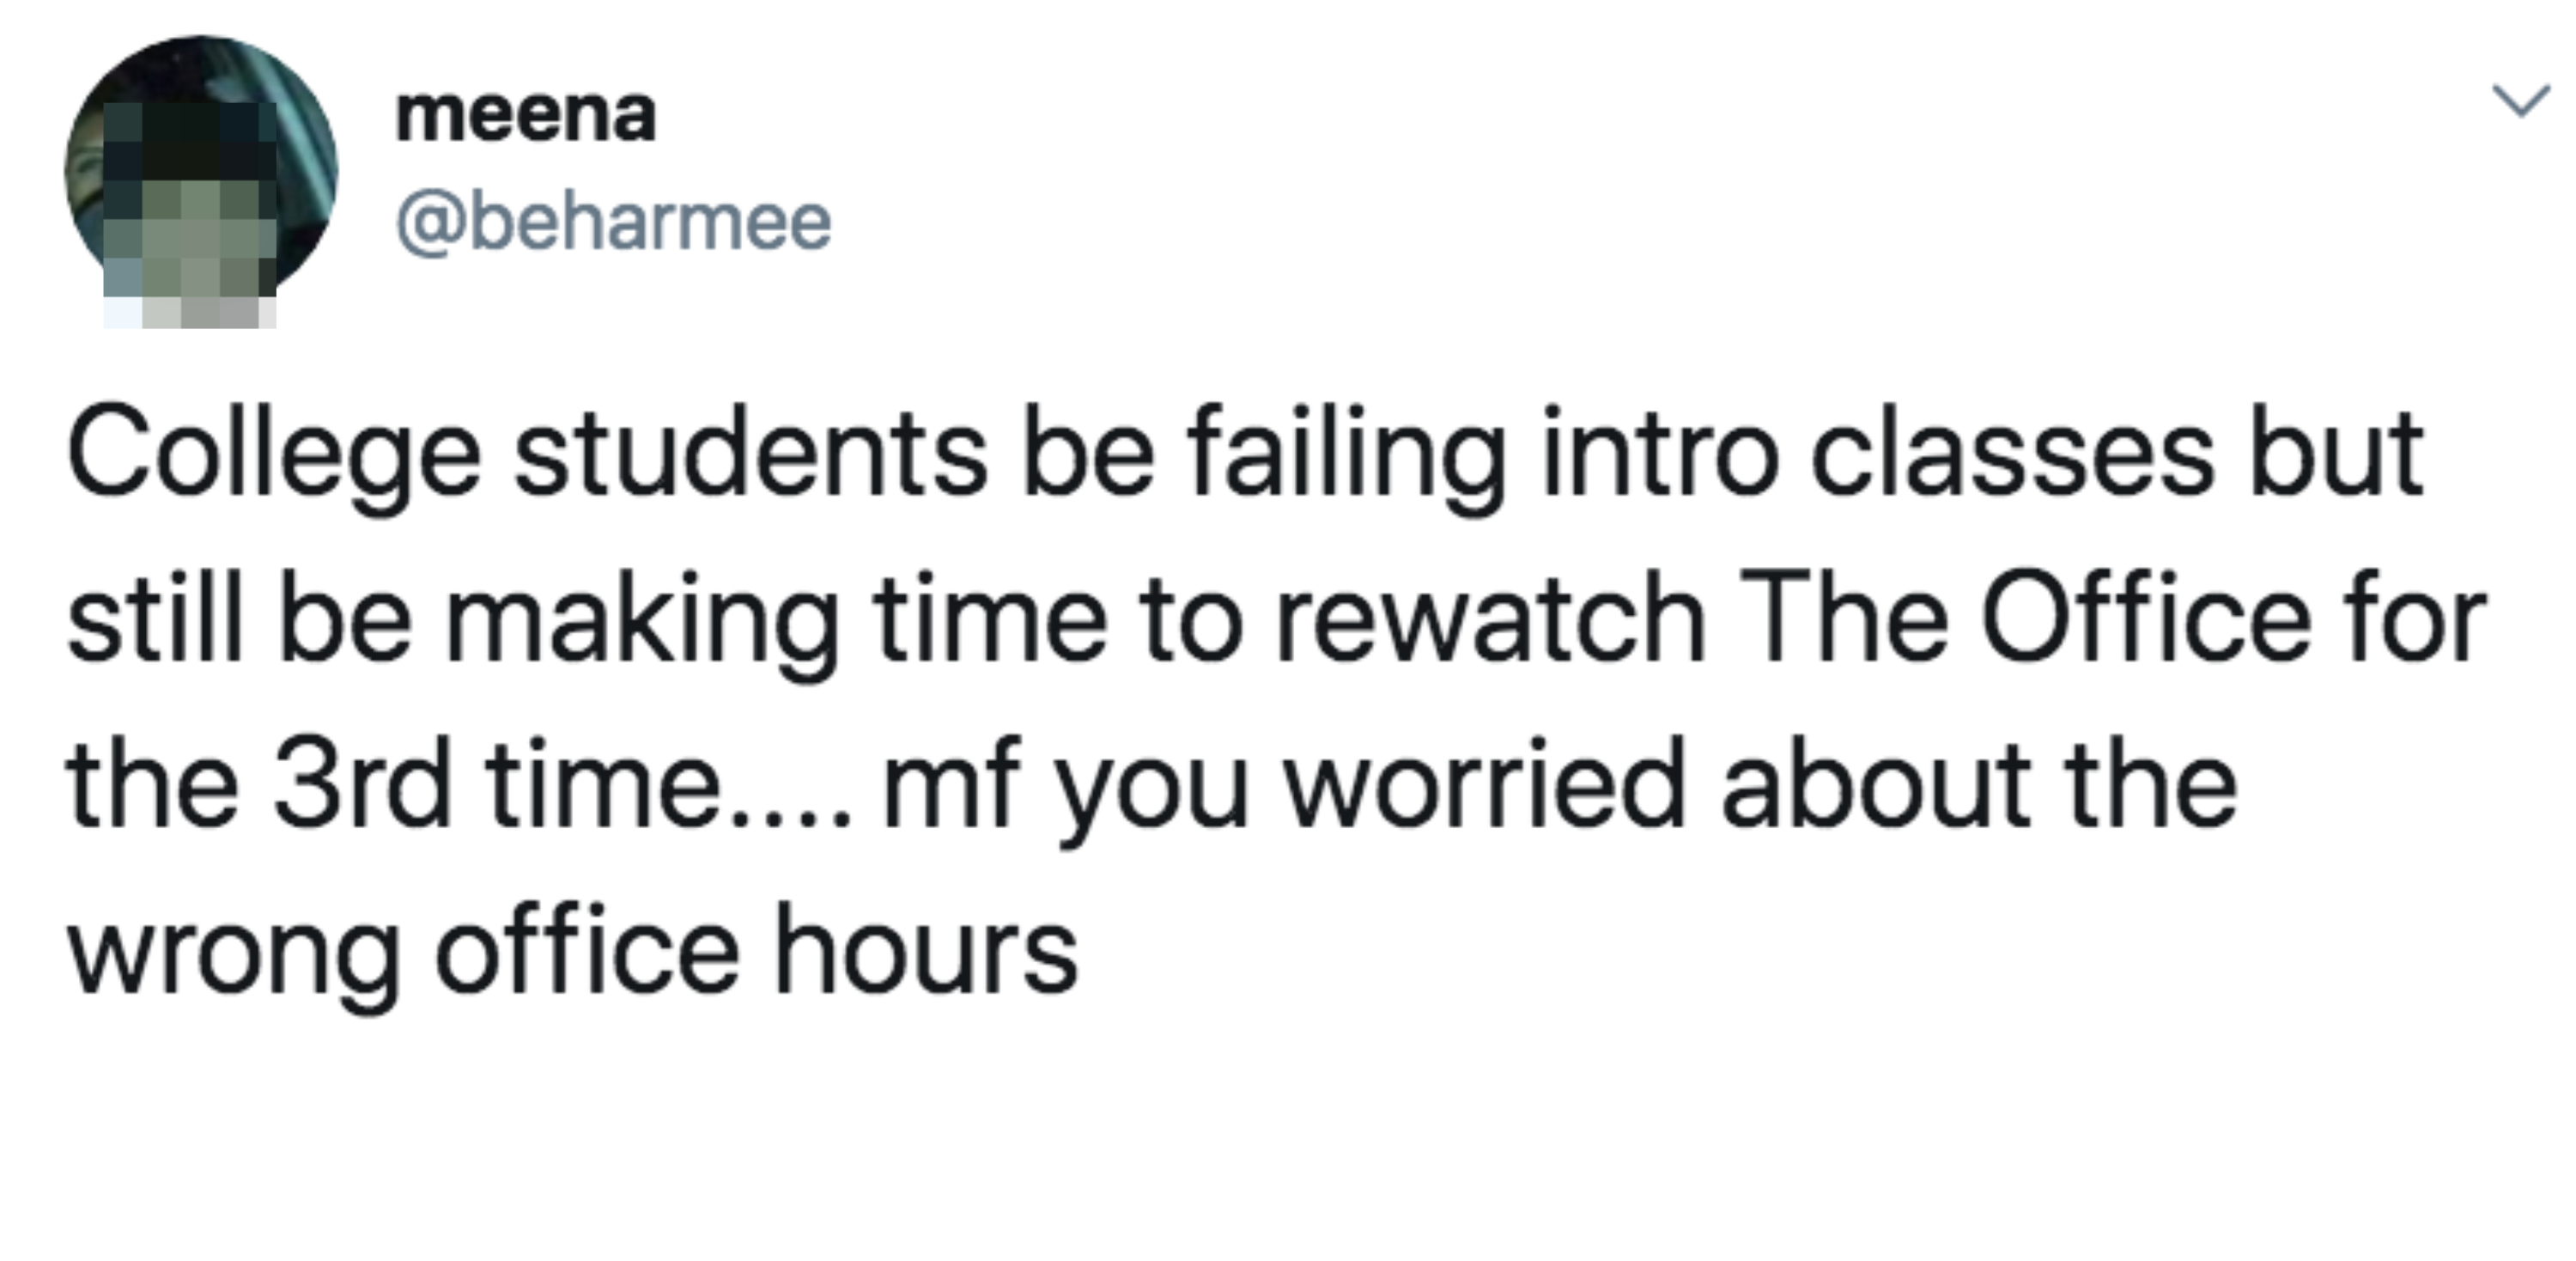 Tweet by user @beharnee criticizes college students rewatching The Office instead of attending study hours